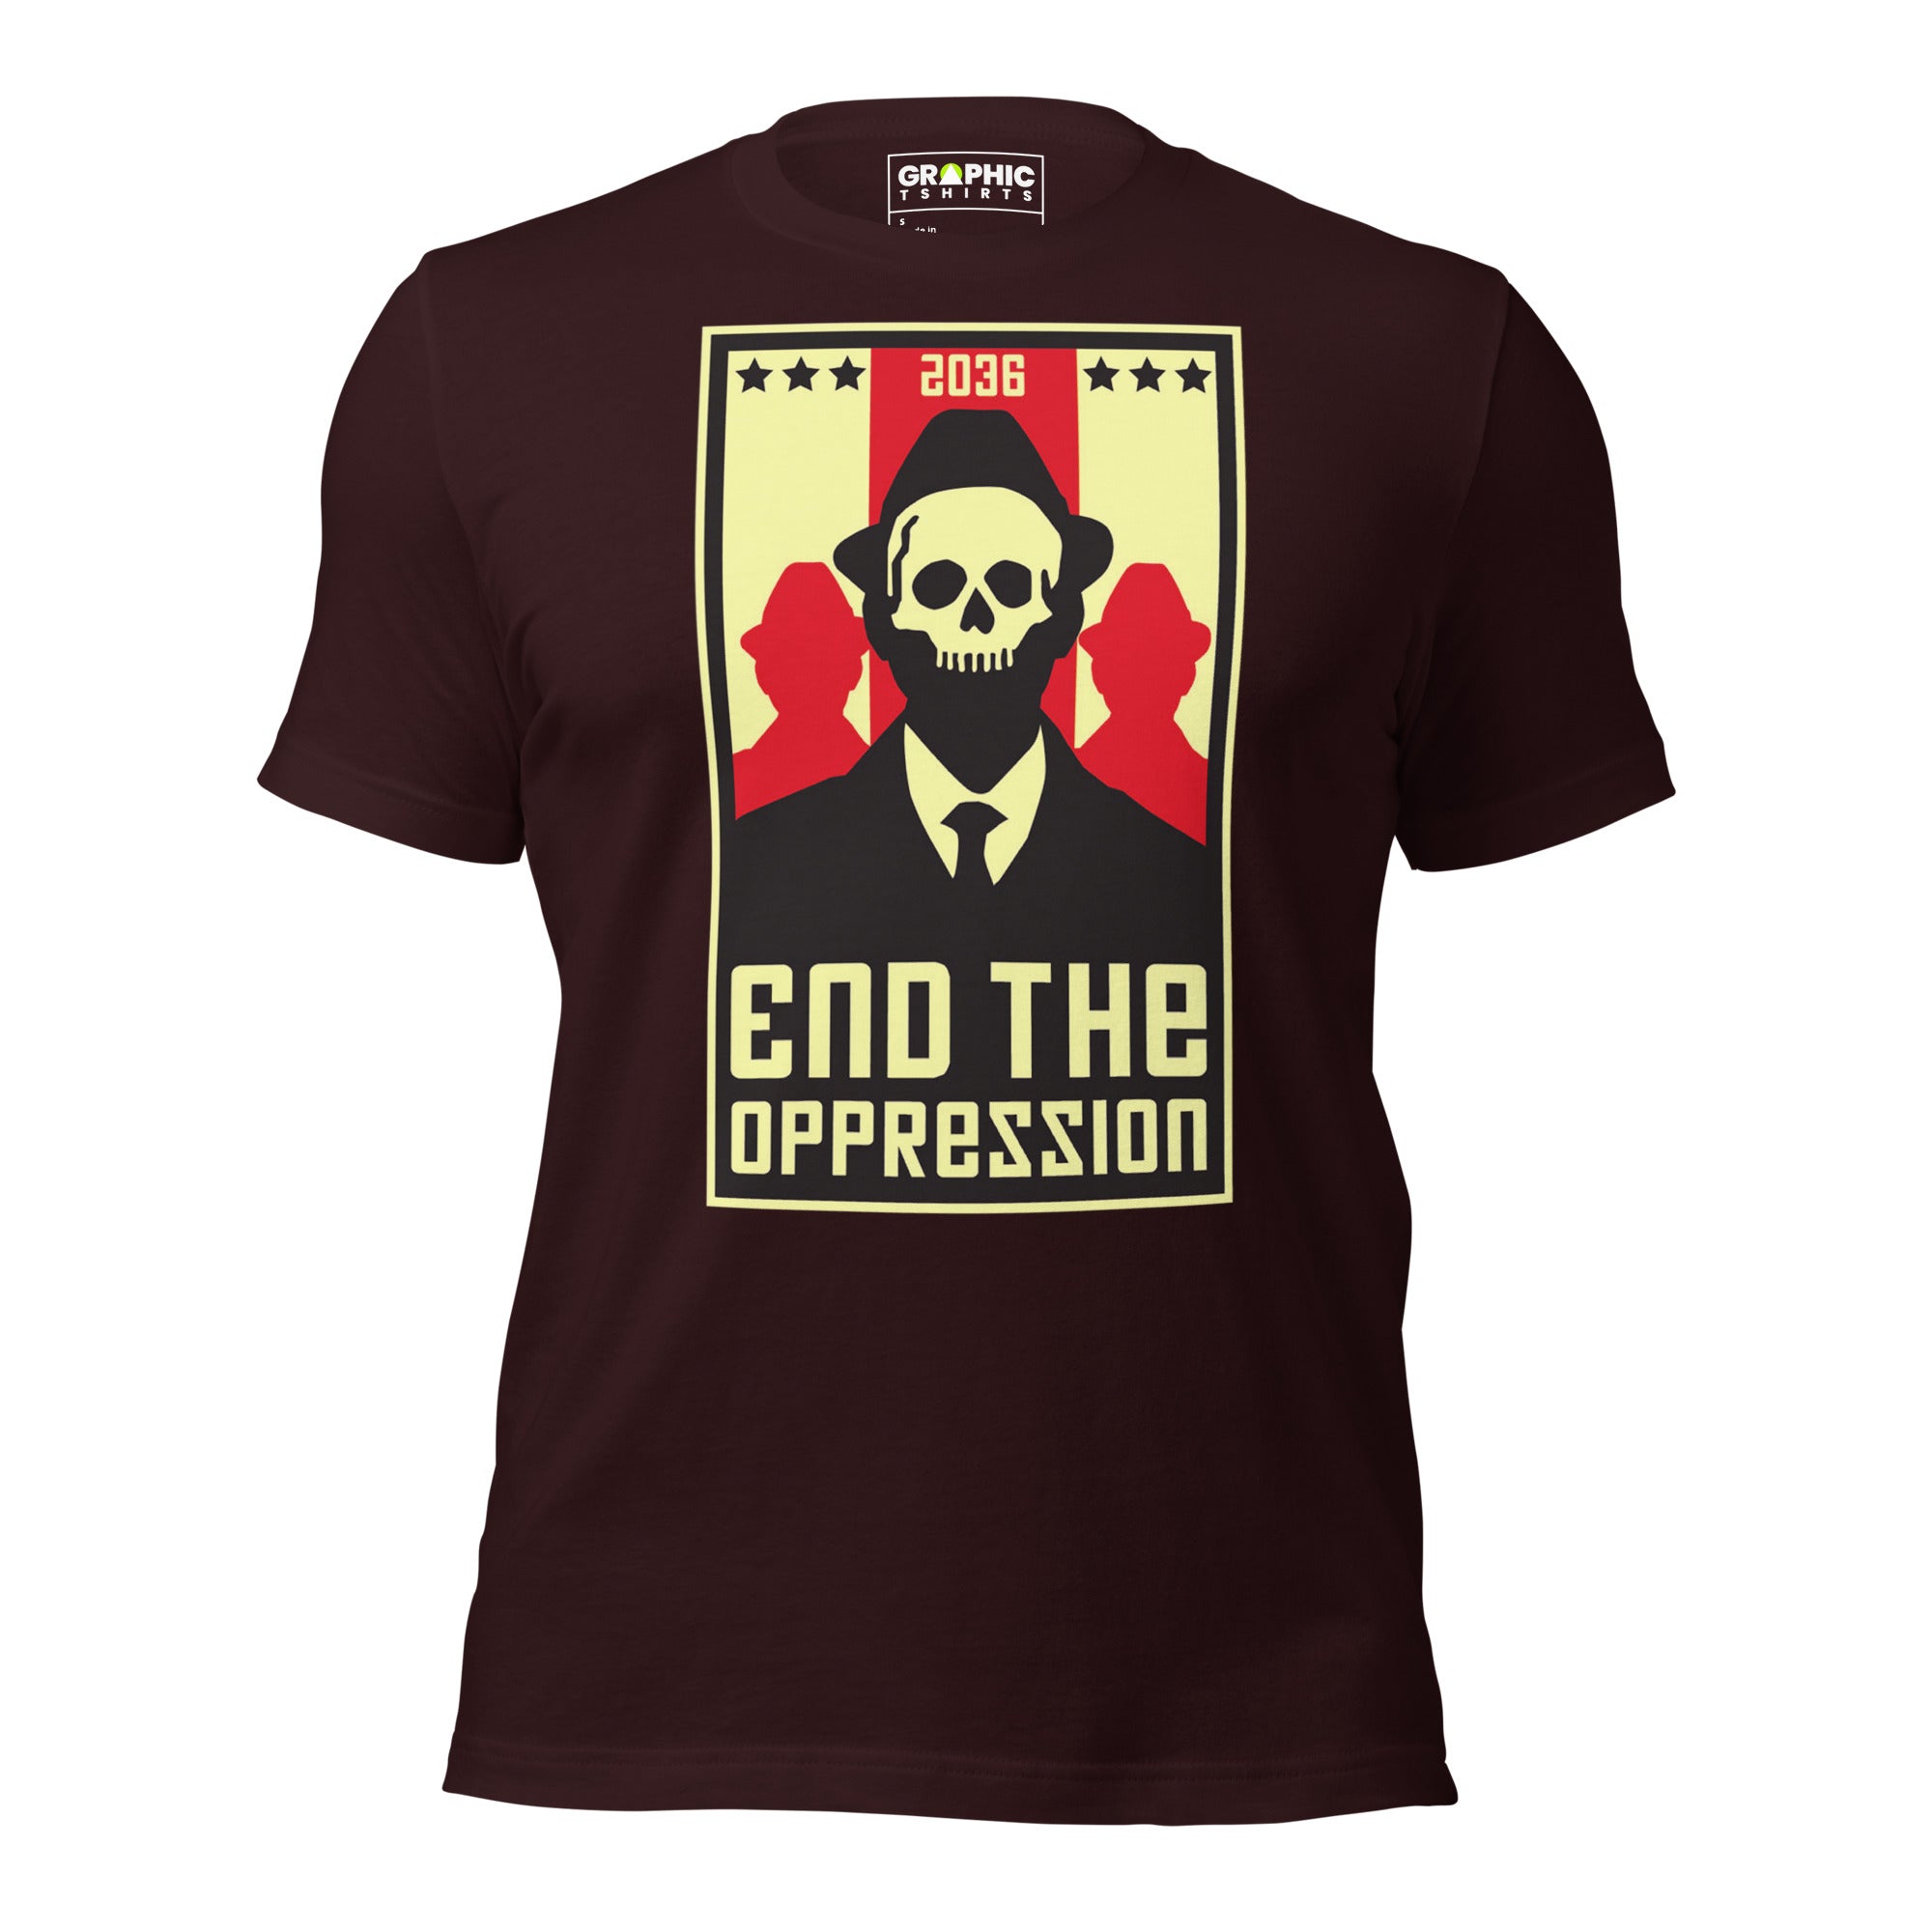 Unisex Staple T-Shirt - End The Oppression - GRAPHIC T-SHIRTS